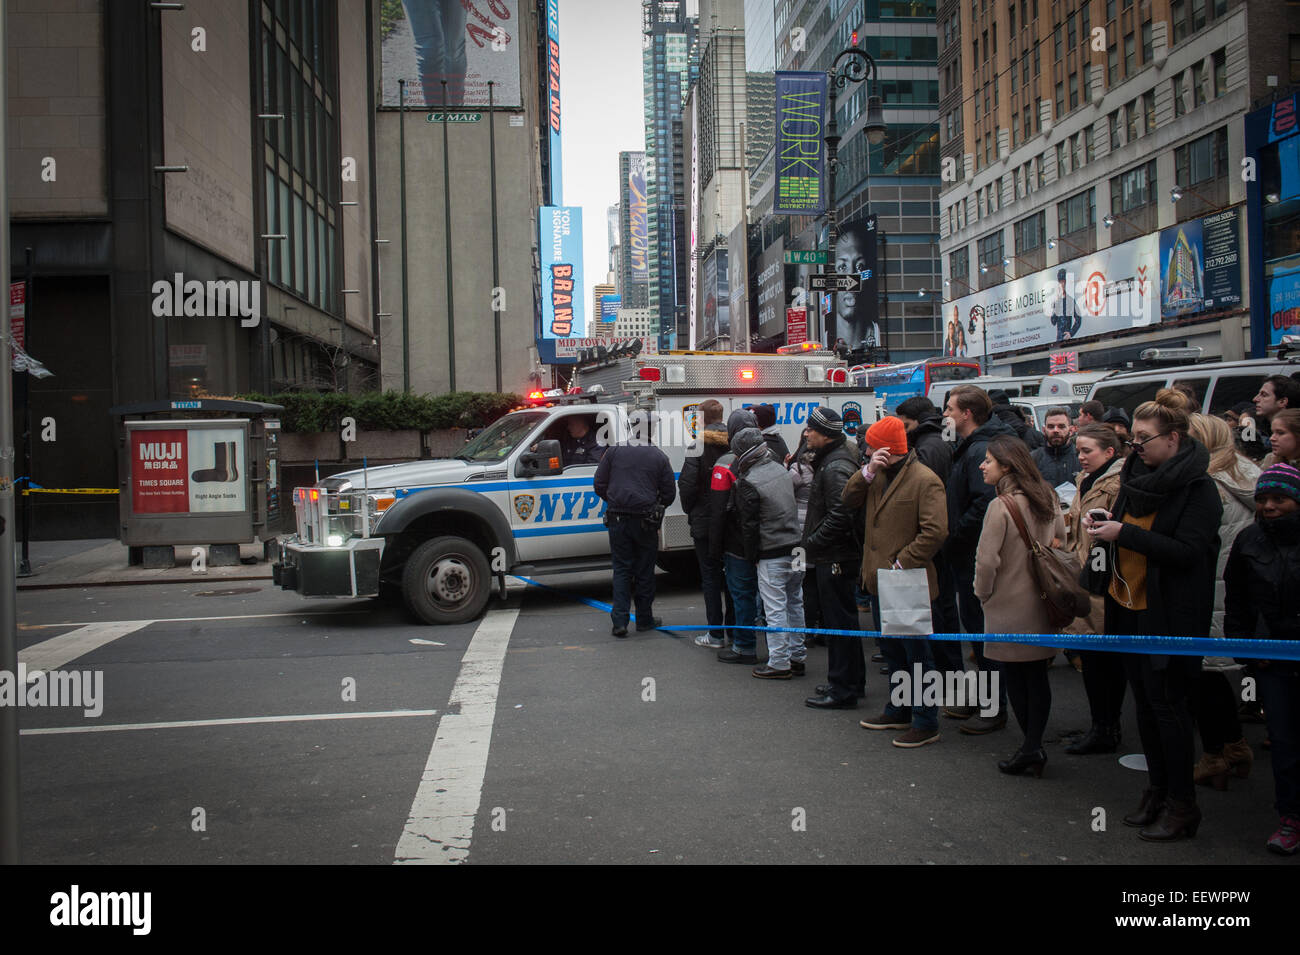 Manhattan, New York, USA. 21st Jan, 2015. NYPD ESU Unit arrives as police investigate the scene of last night's fatal stabbing on West 40th Street between 7th and 8th Avenues, Wed., Jan. 21, 2015. © Bryan Smith/ZUMA Wire/Alamy Live News Stock Photo